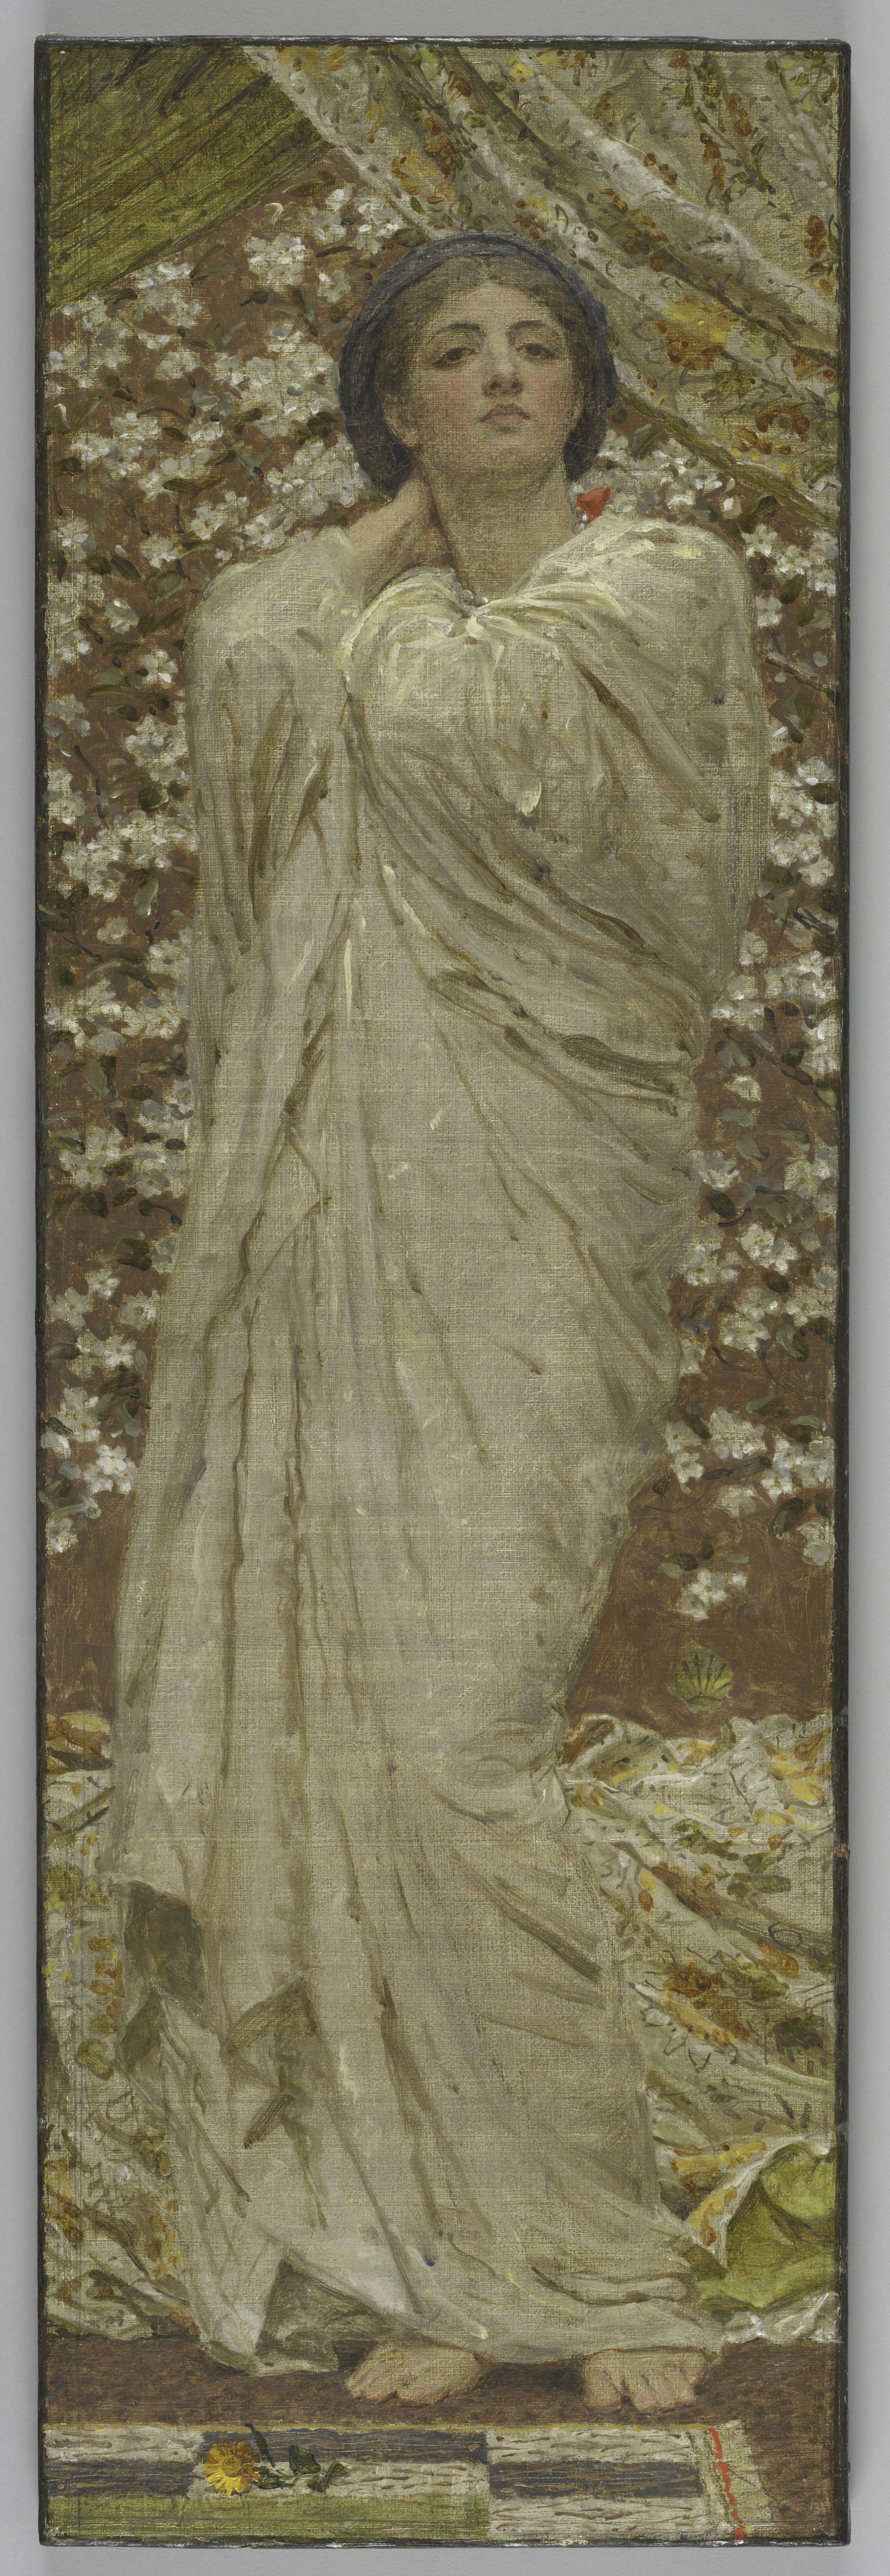 A full-length, oil-paint portrait of a standing female figure draped in a sheer robe which covers her from neck to ankle.